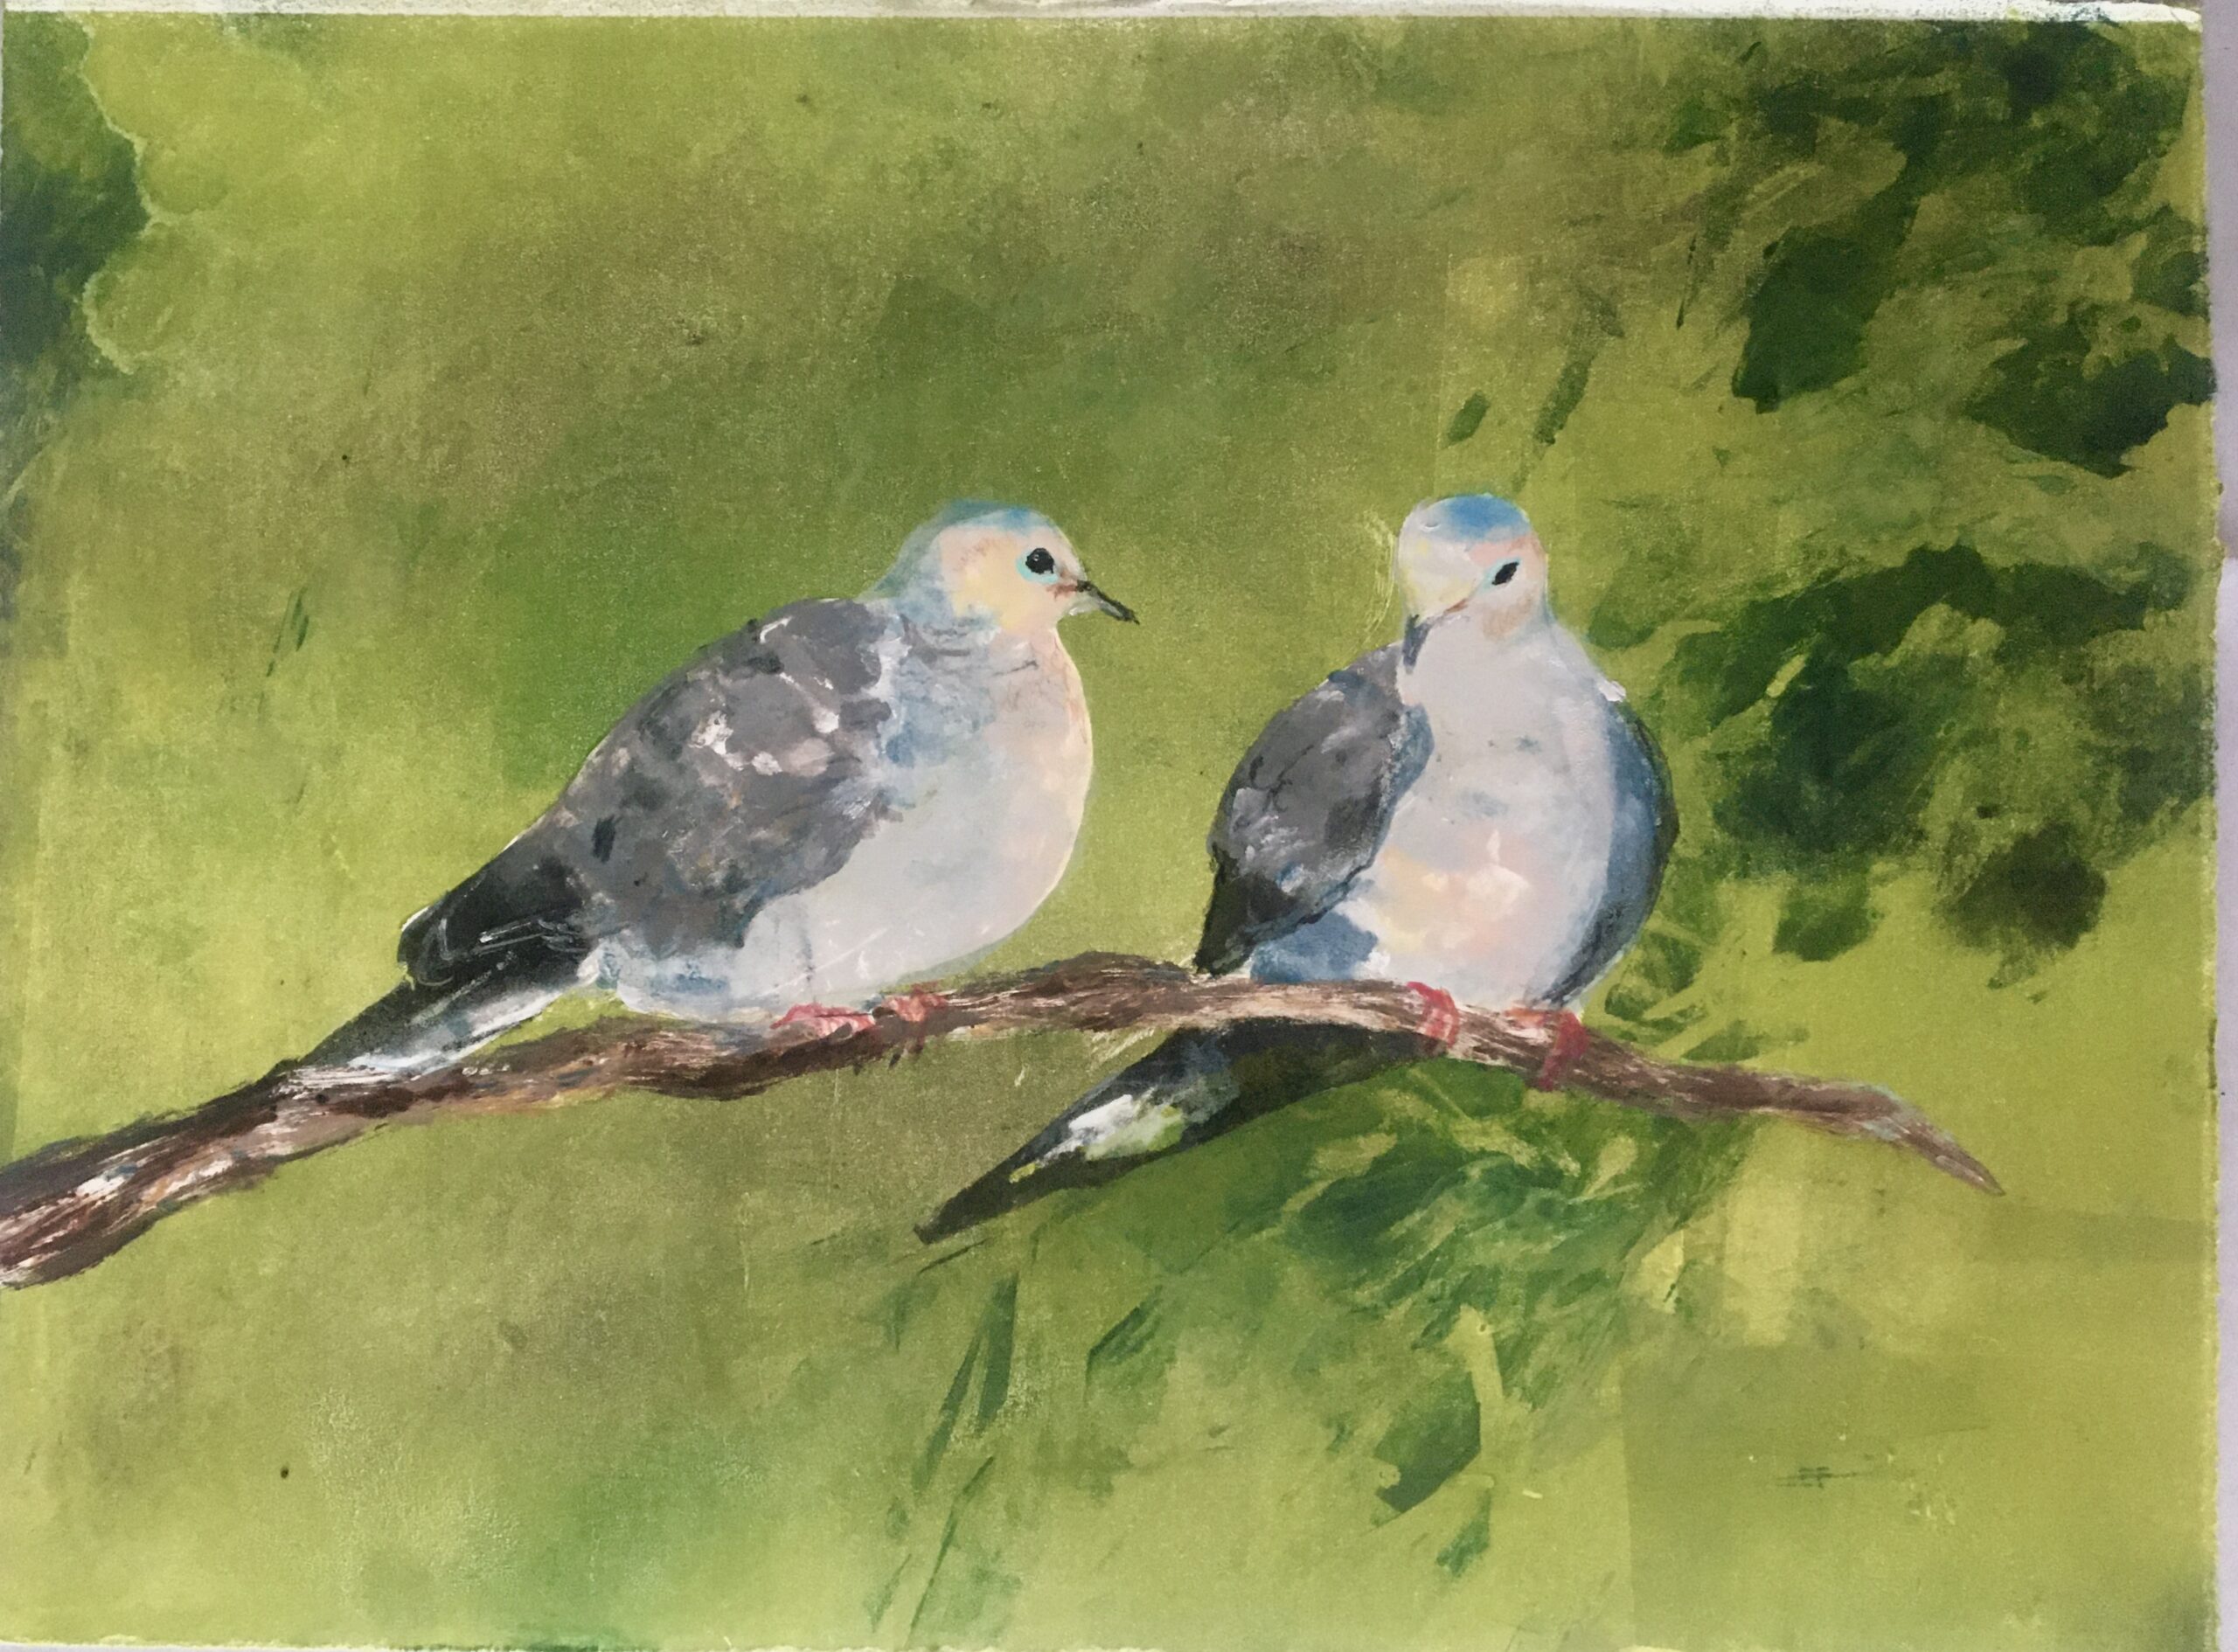 Mourning Dove Pair